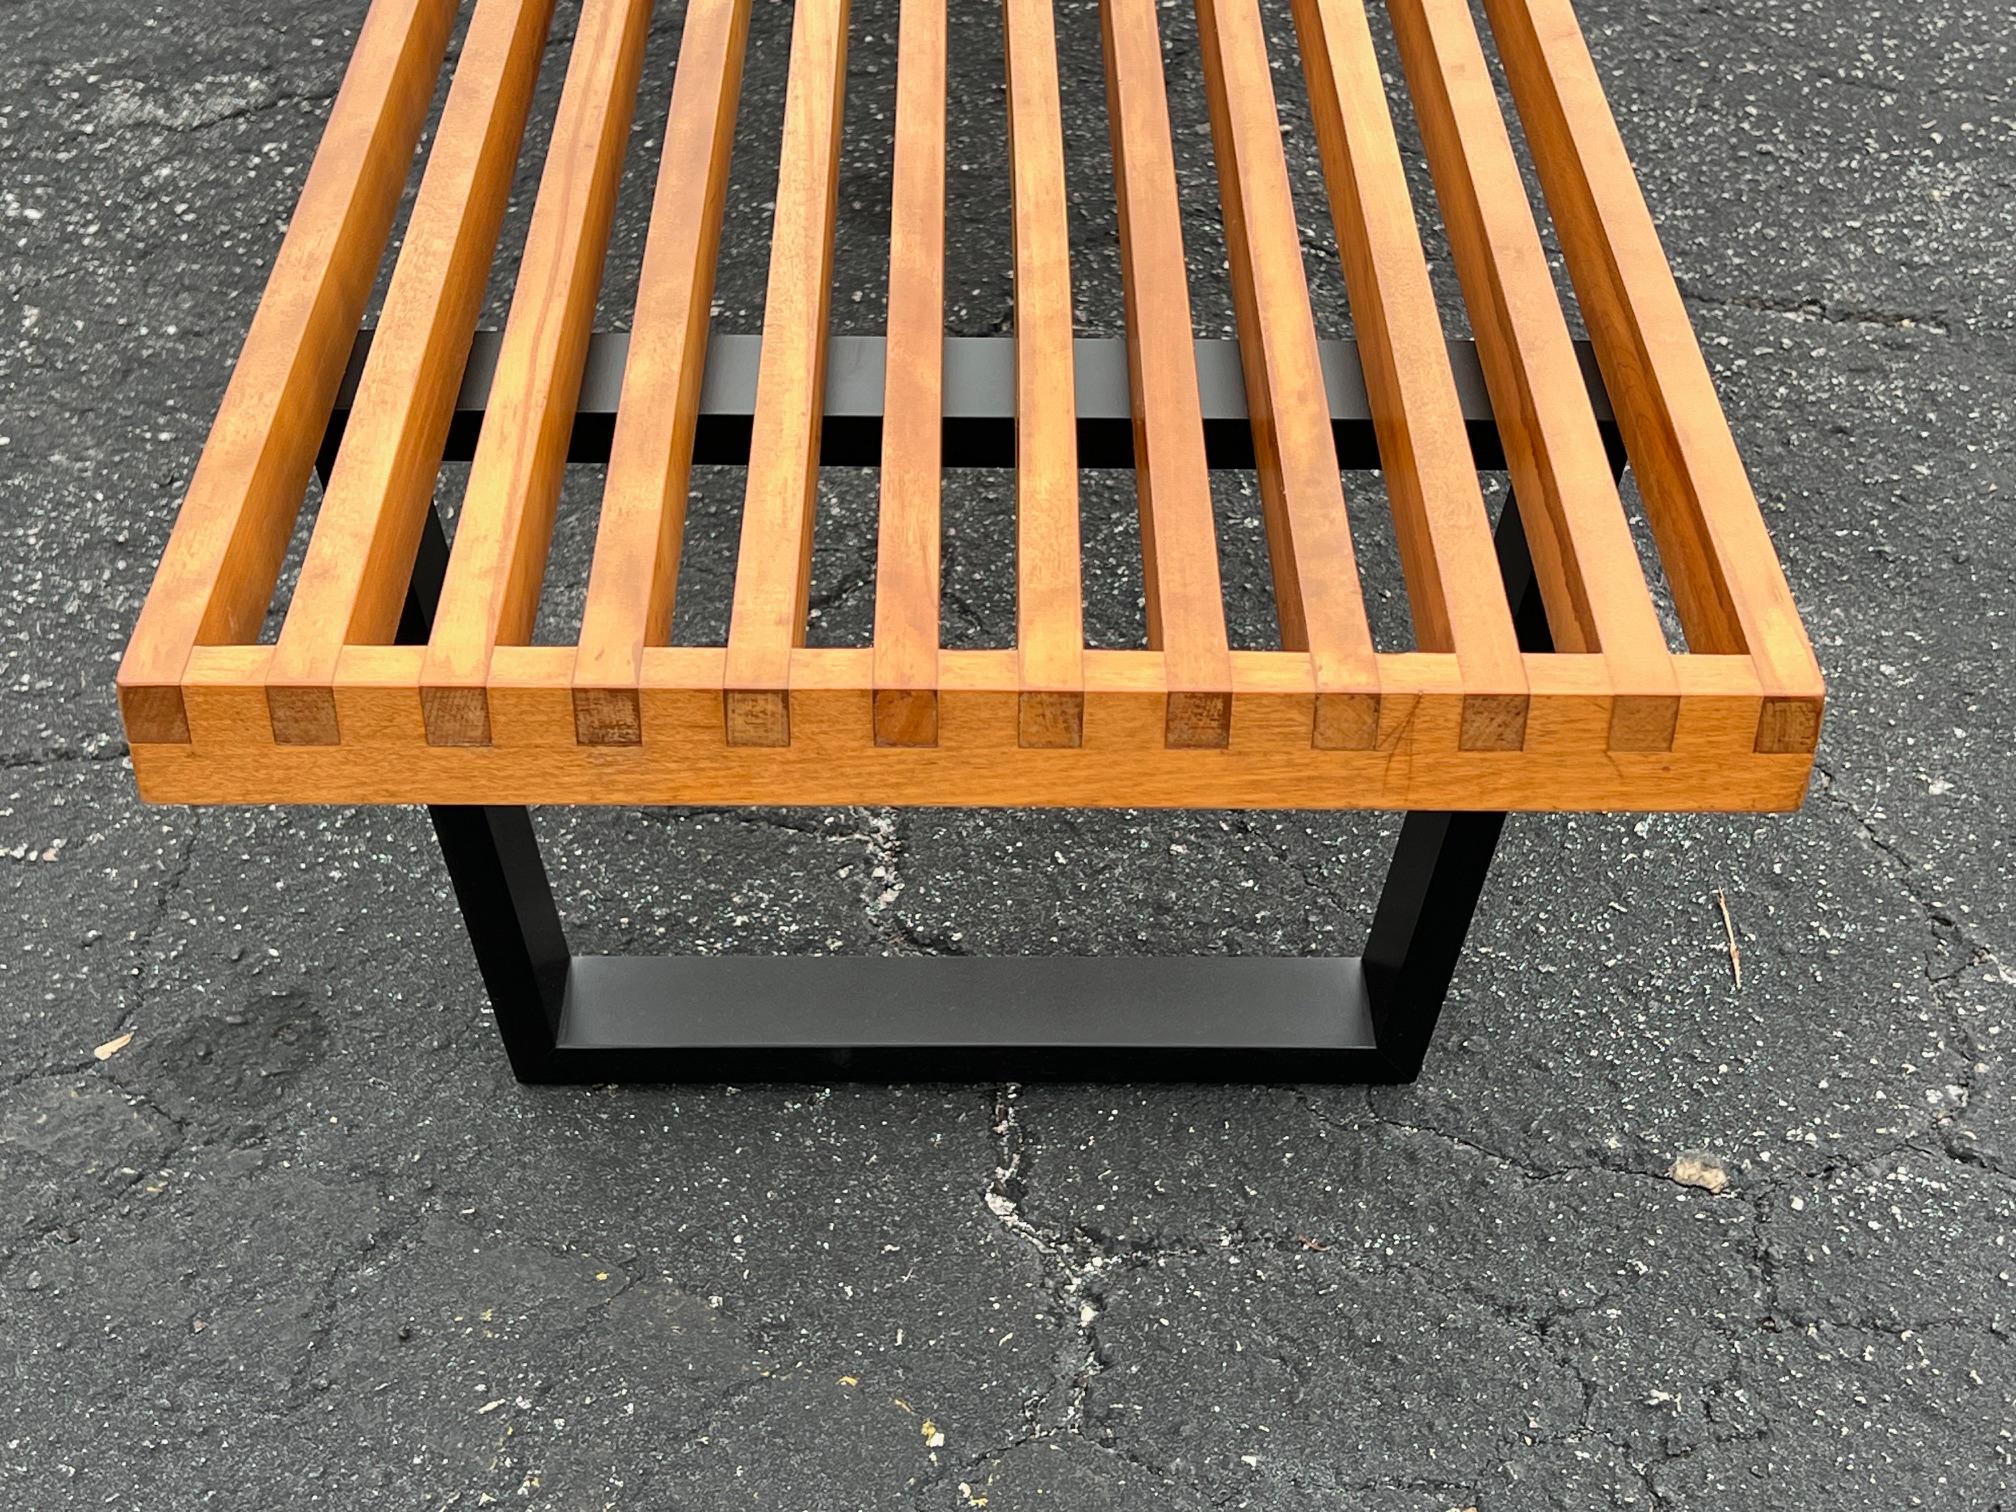 Mid-20th Century Six Foot George Nelson Classic Slat Bench 1950's Original For Sale